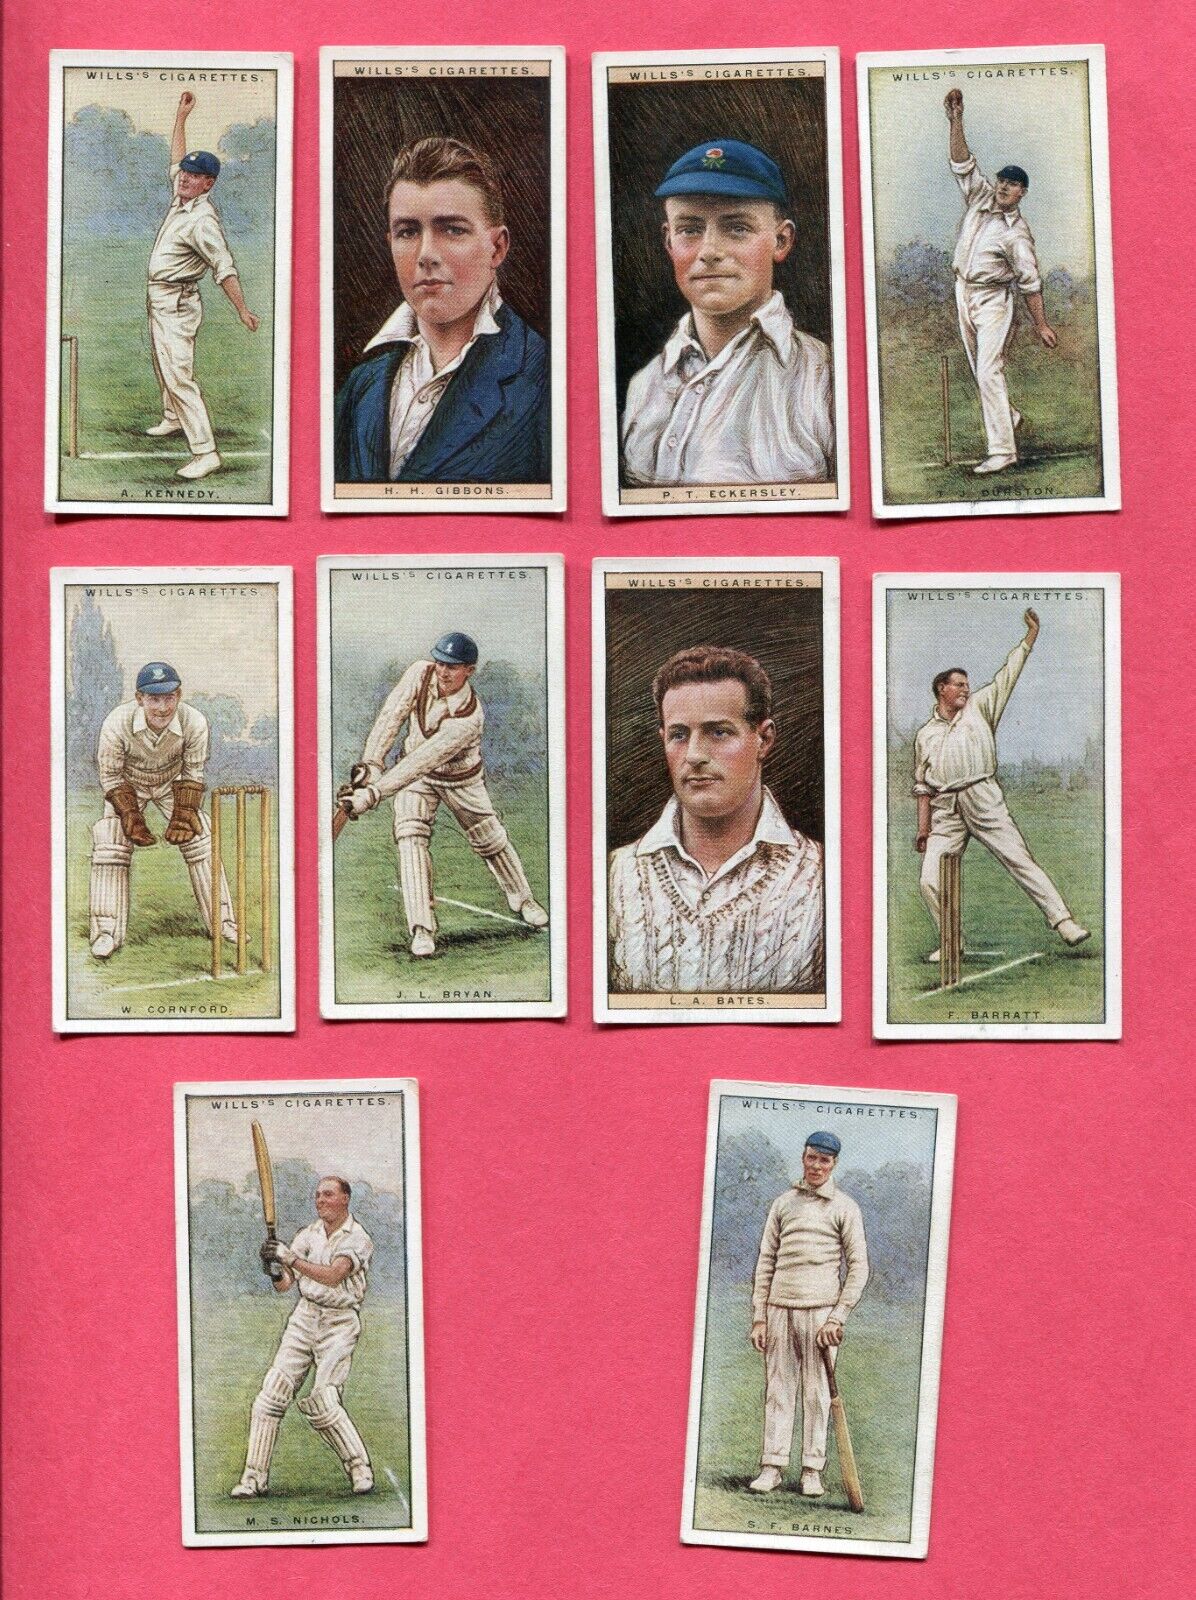 1929 W.D. & H.O. WILL\'S CIGARETTES CRICKETERS 2ND SERIES 10 TOBACCO CARD LOT